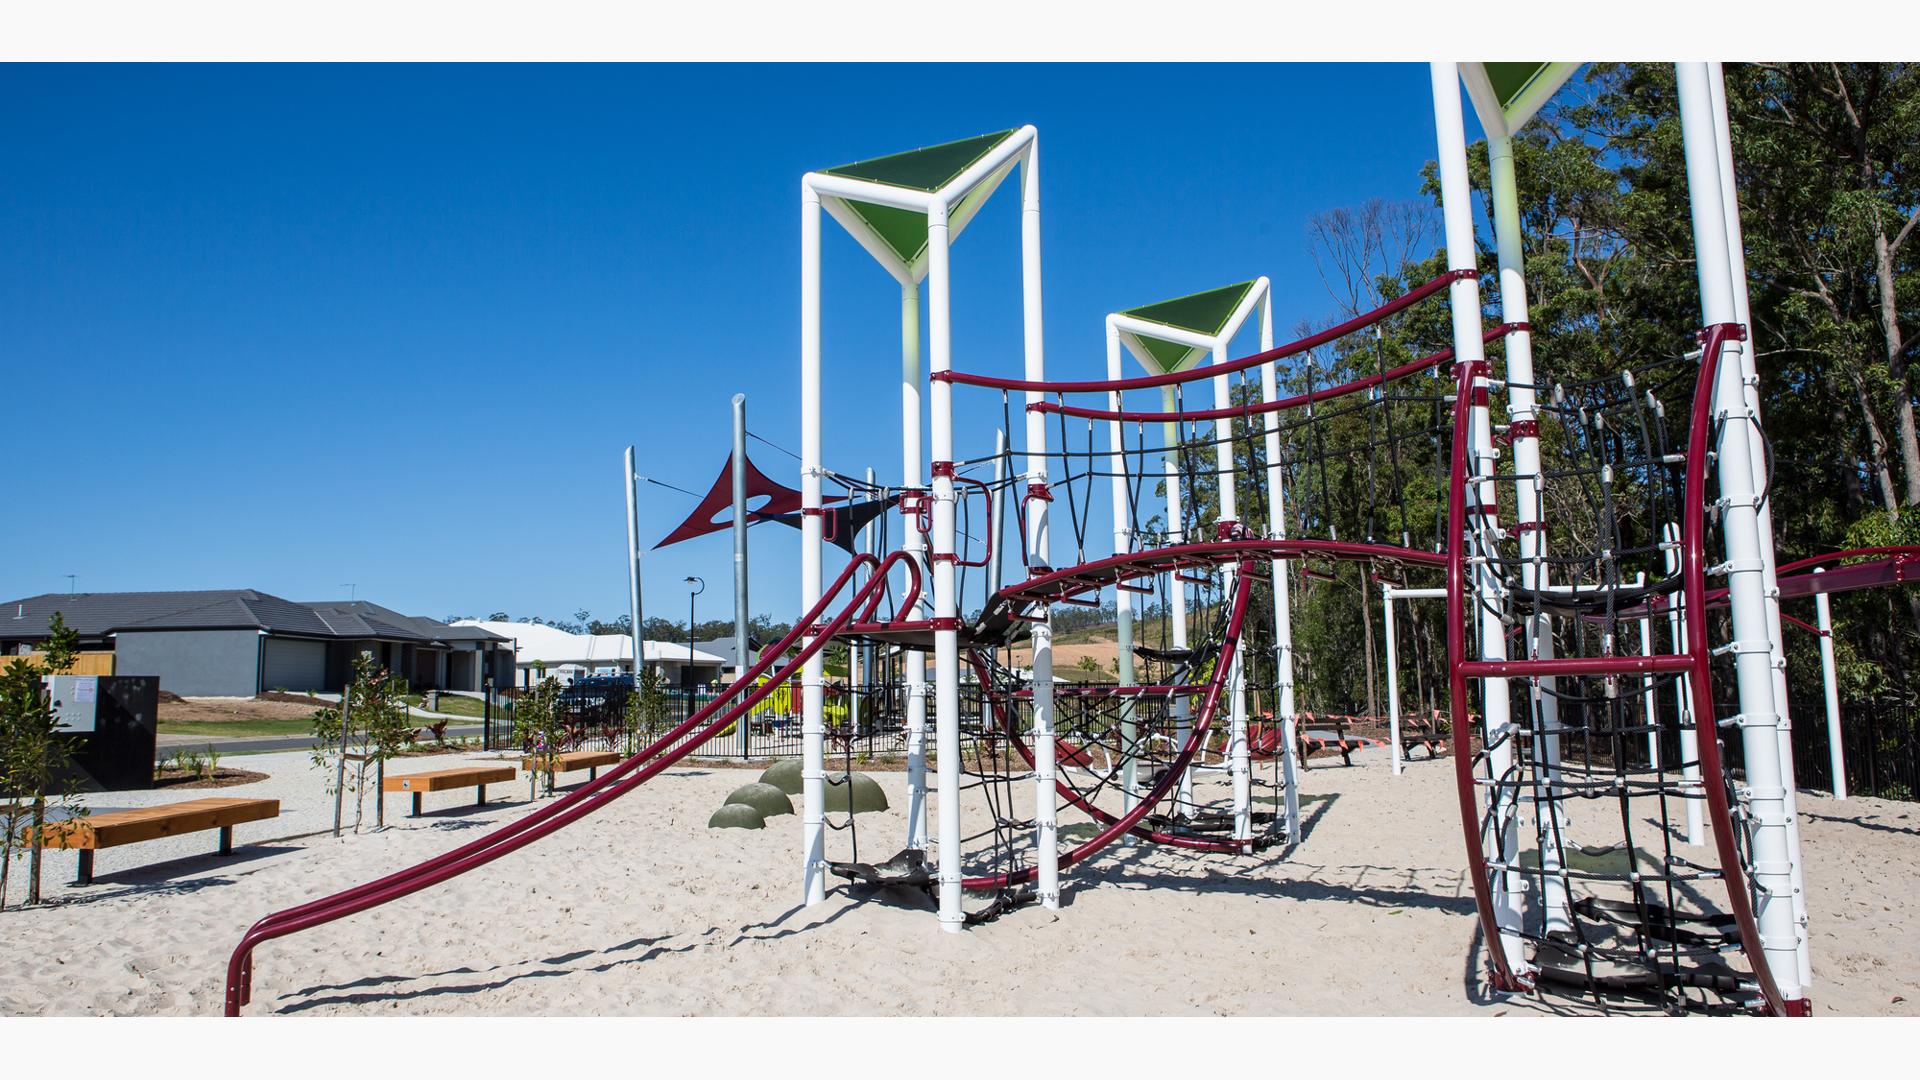 Custom GeoNetrix play structure sits on a sandy beach with trees behind it and a neighborhood across the street.